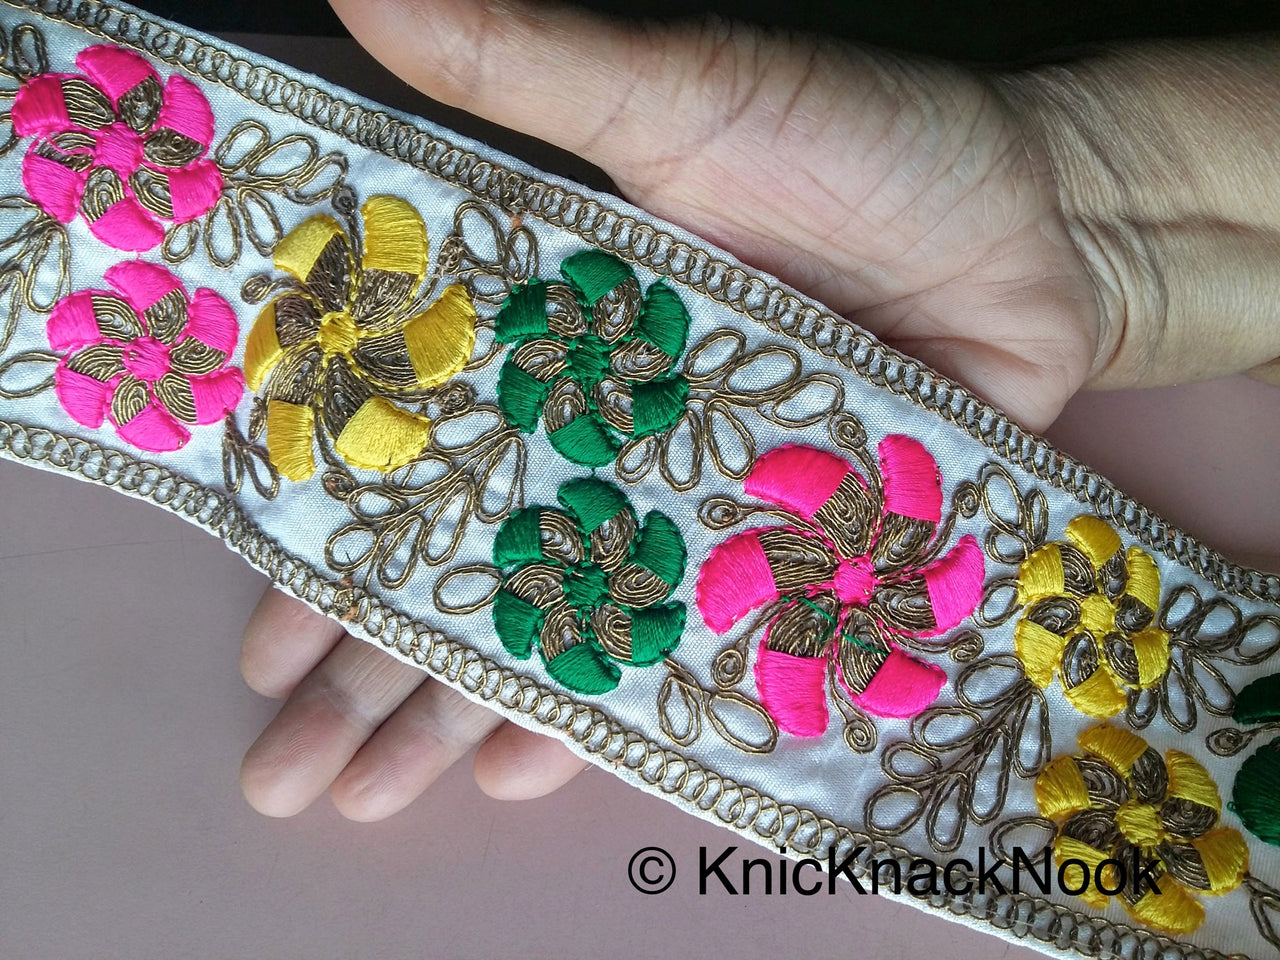 Off White Fabric Trim With Bronze, Green, Pink And Blue/Yellow Floral Embroidery